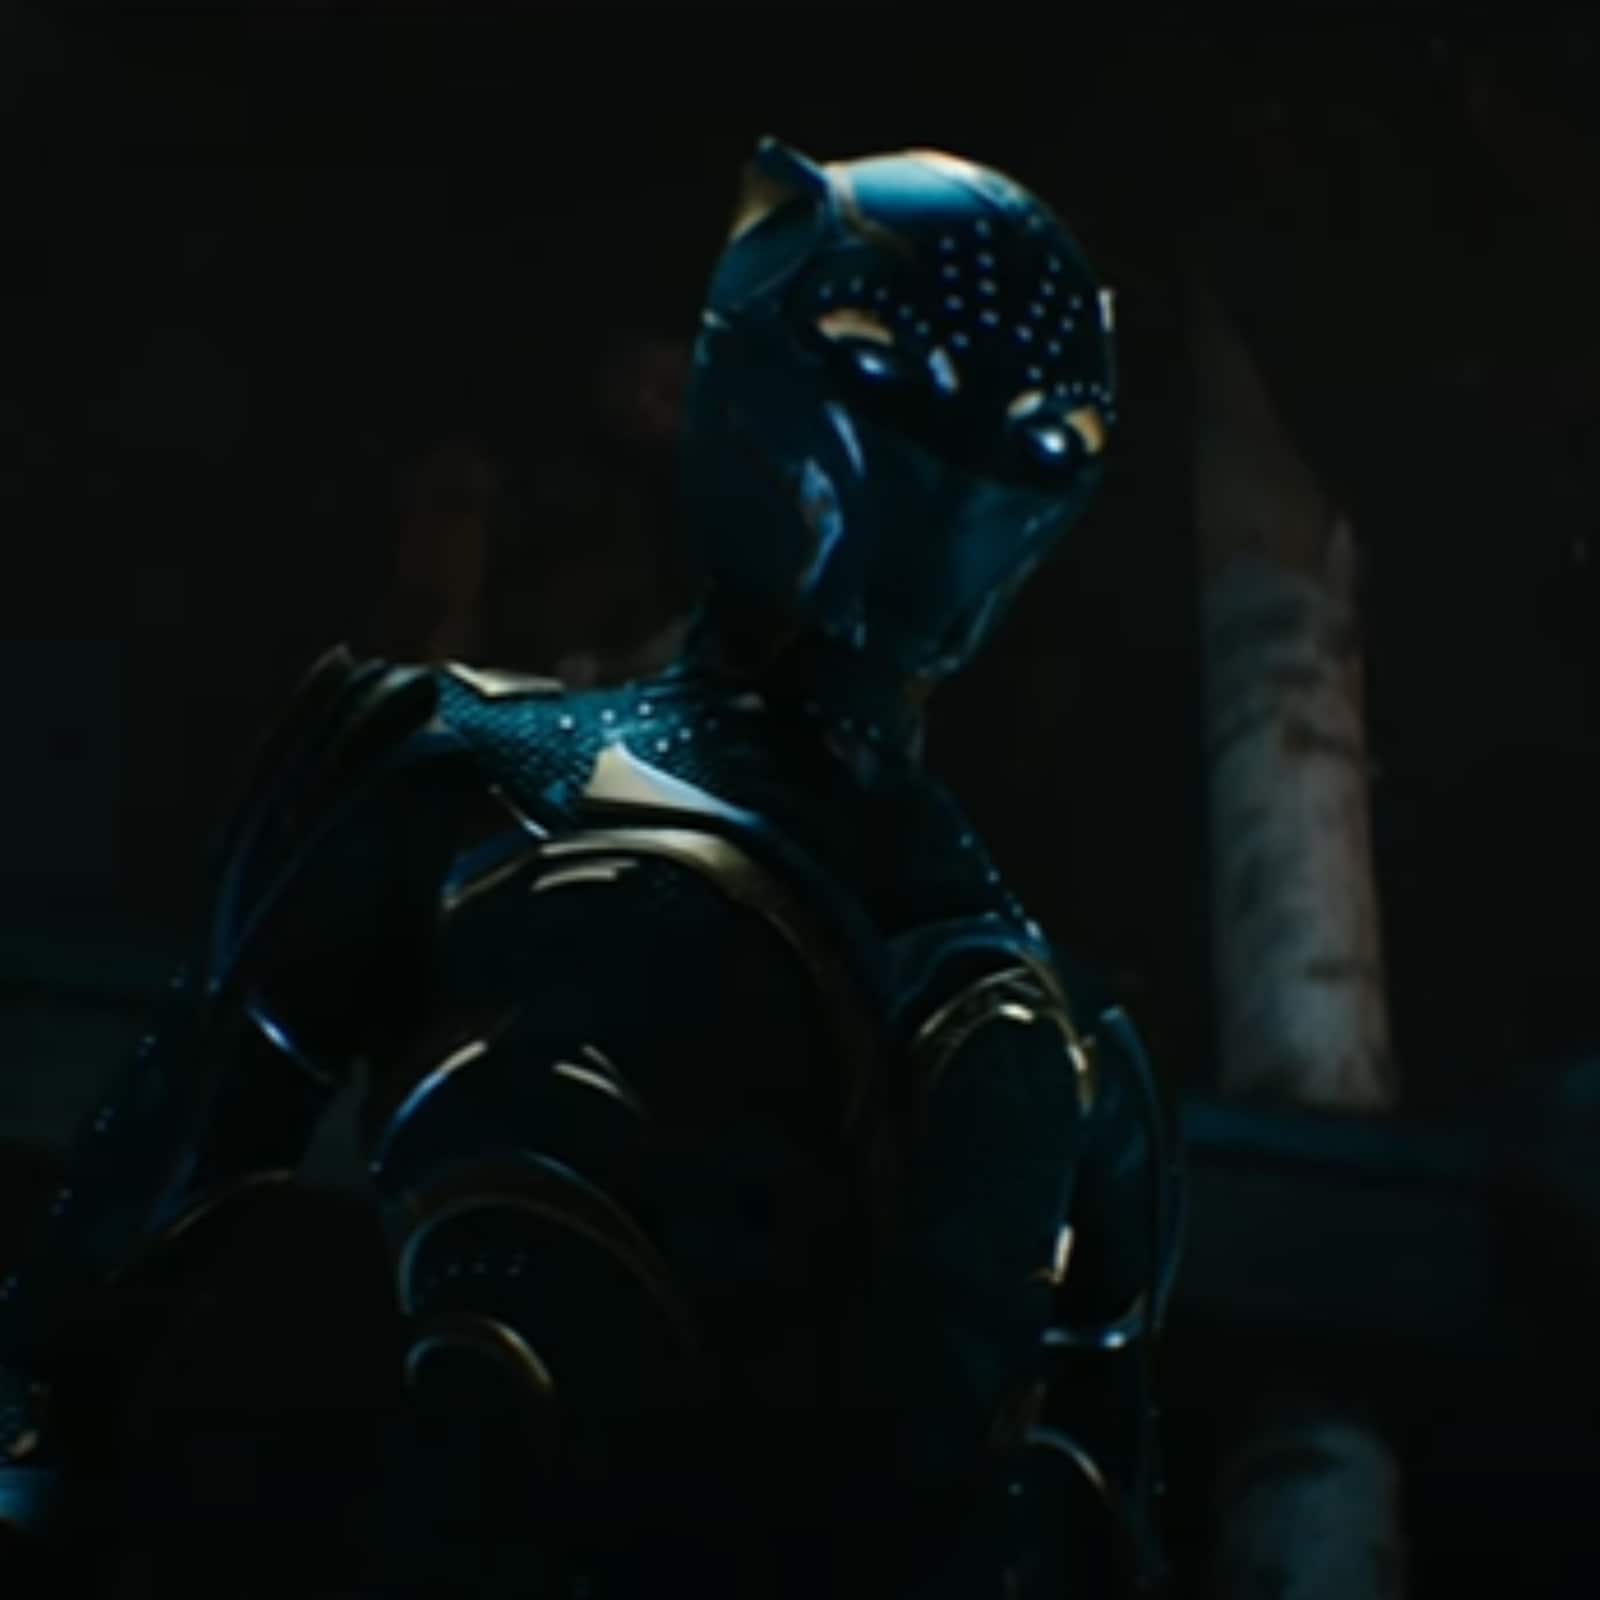 Black Panther 2 Trailer: Shuri Dons Iconic Suit, Namor Stands Out; MCU Film Honours Chadwick Boseman